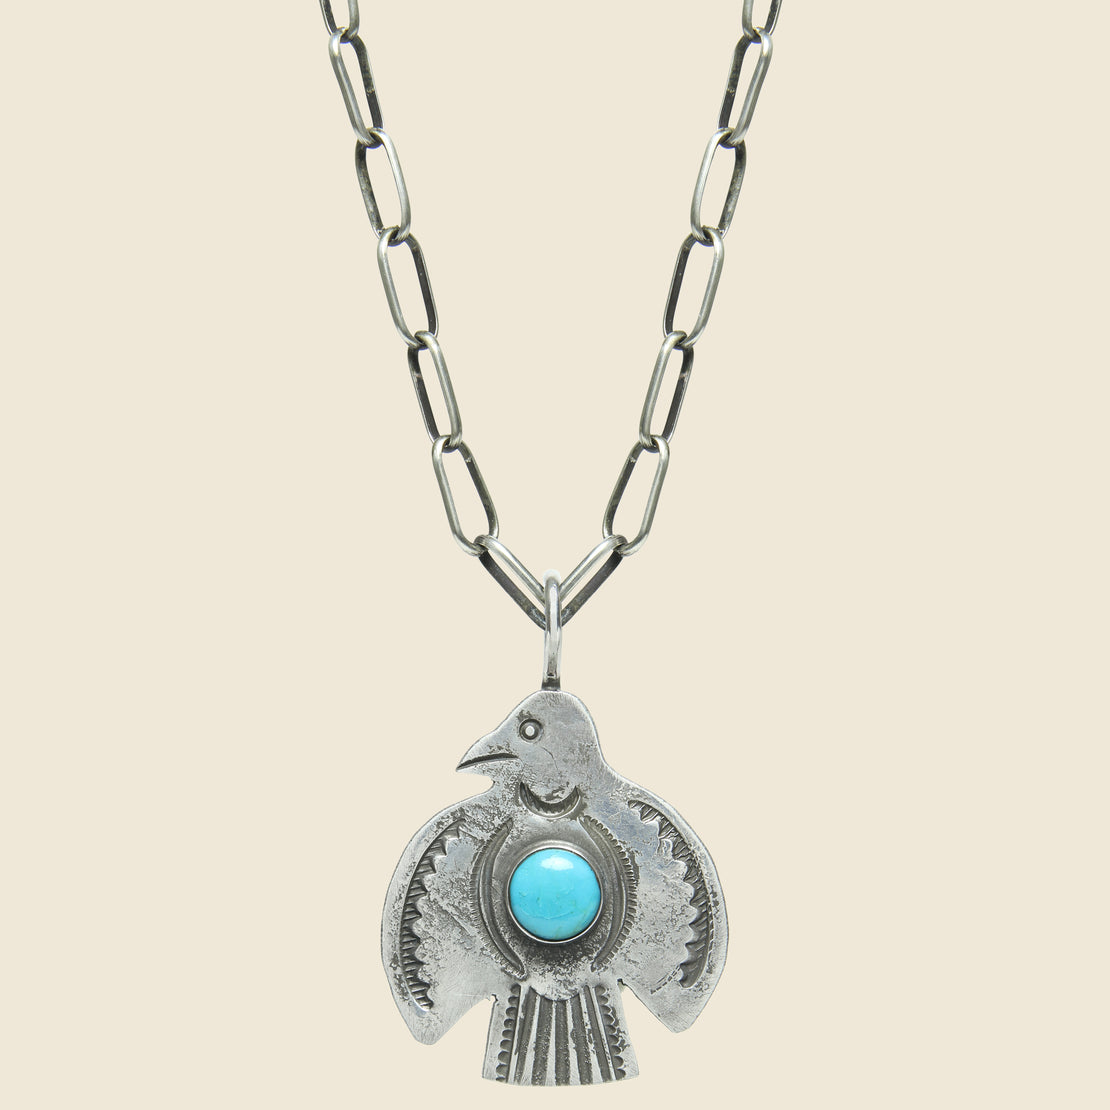 Smith Bros. Trading Co. Round Wings Thunderbird Pendant Necklace - Sterling/Turquoise